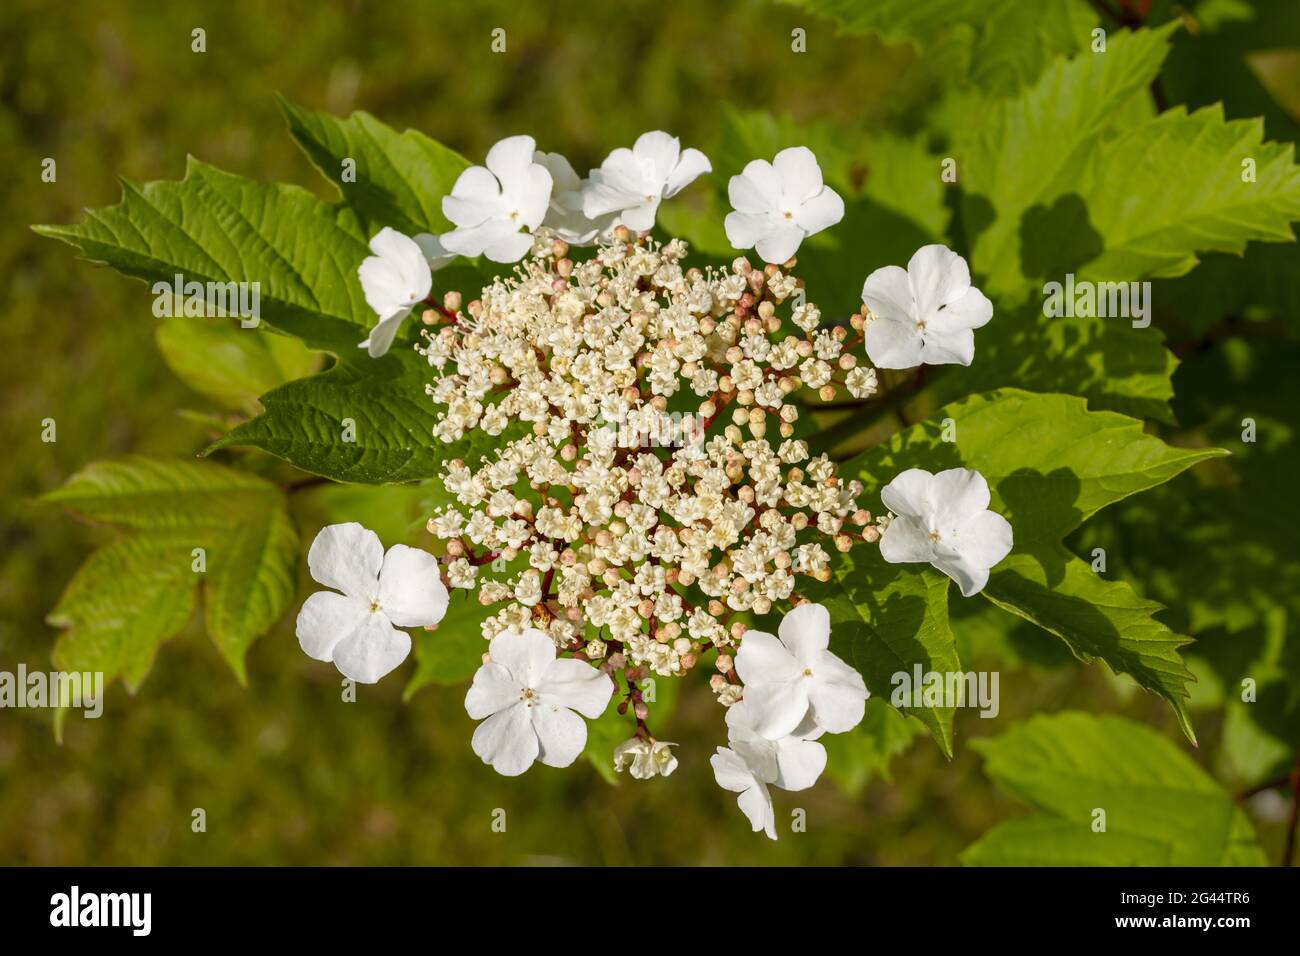 Flower of the common snowball between indented and serrated foliage leaves Stock Photo